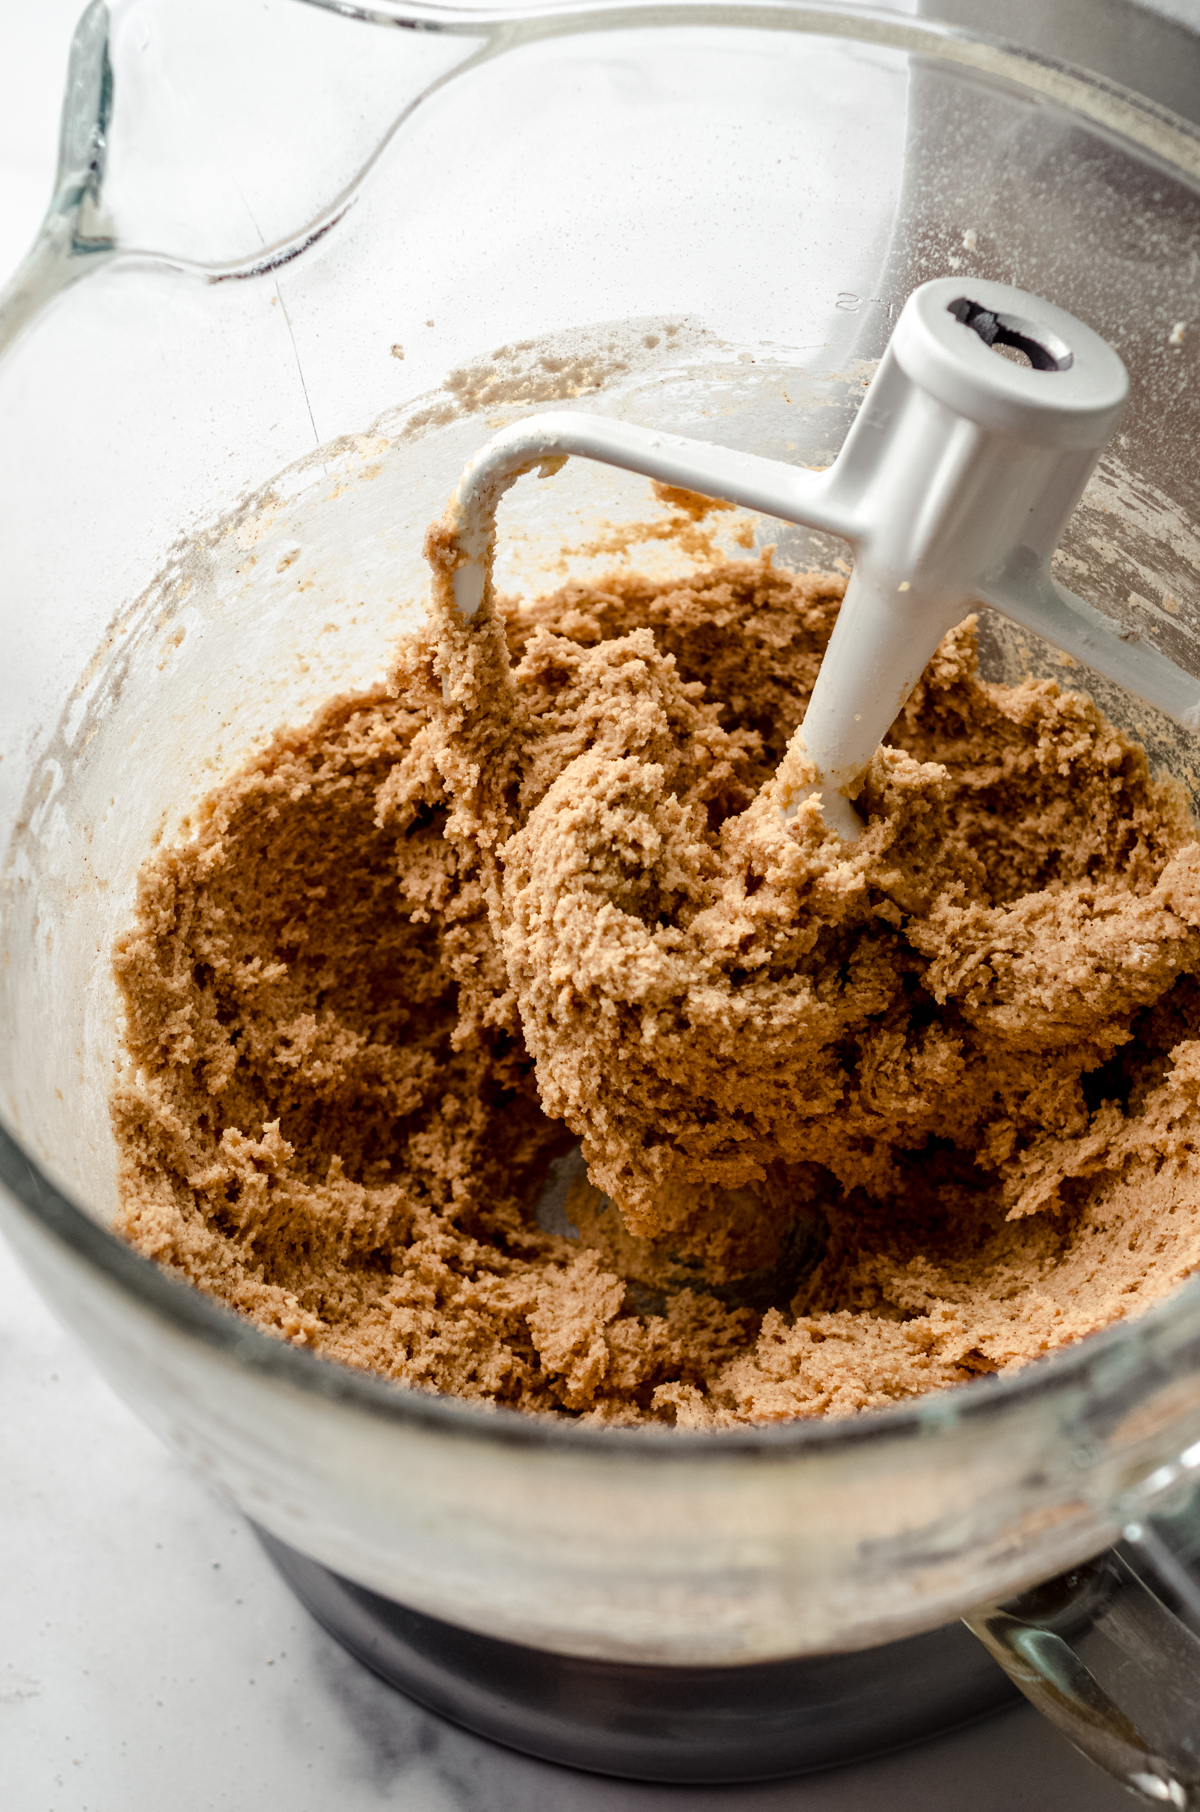 Graham cracker cookie dough in the bowl of a stand mixer.